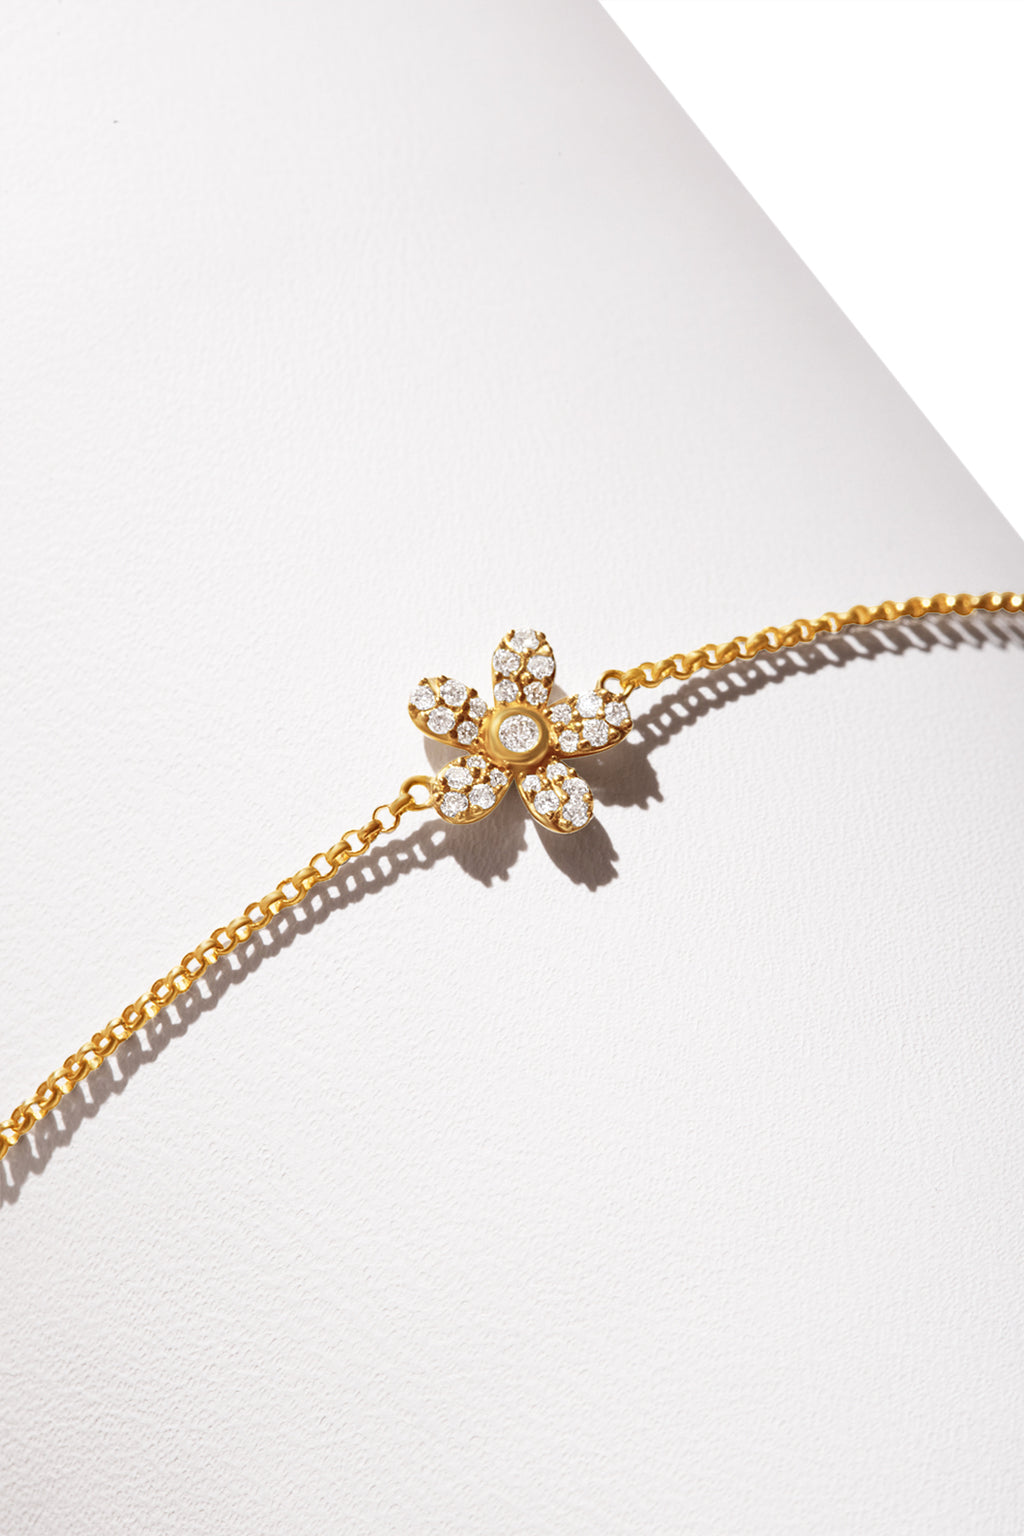 A gold bravelet featuring a dainty flower-shaped charm encrusted with diamonds. 